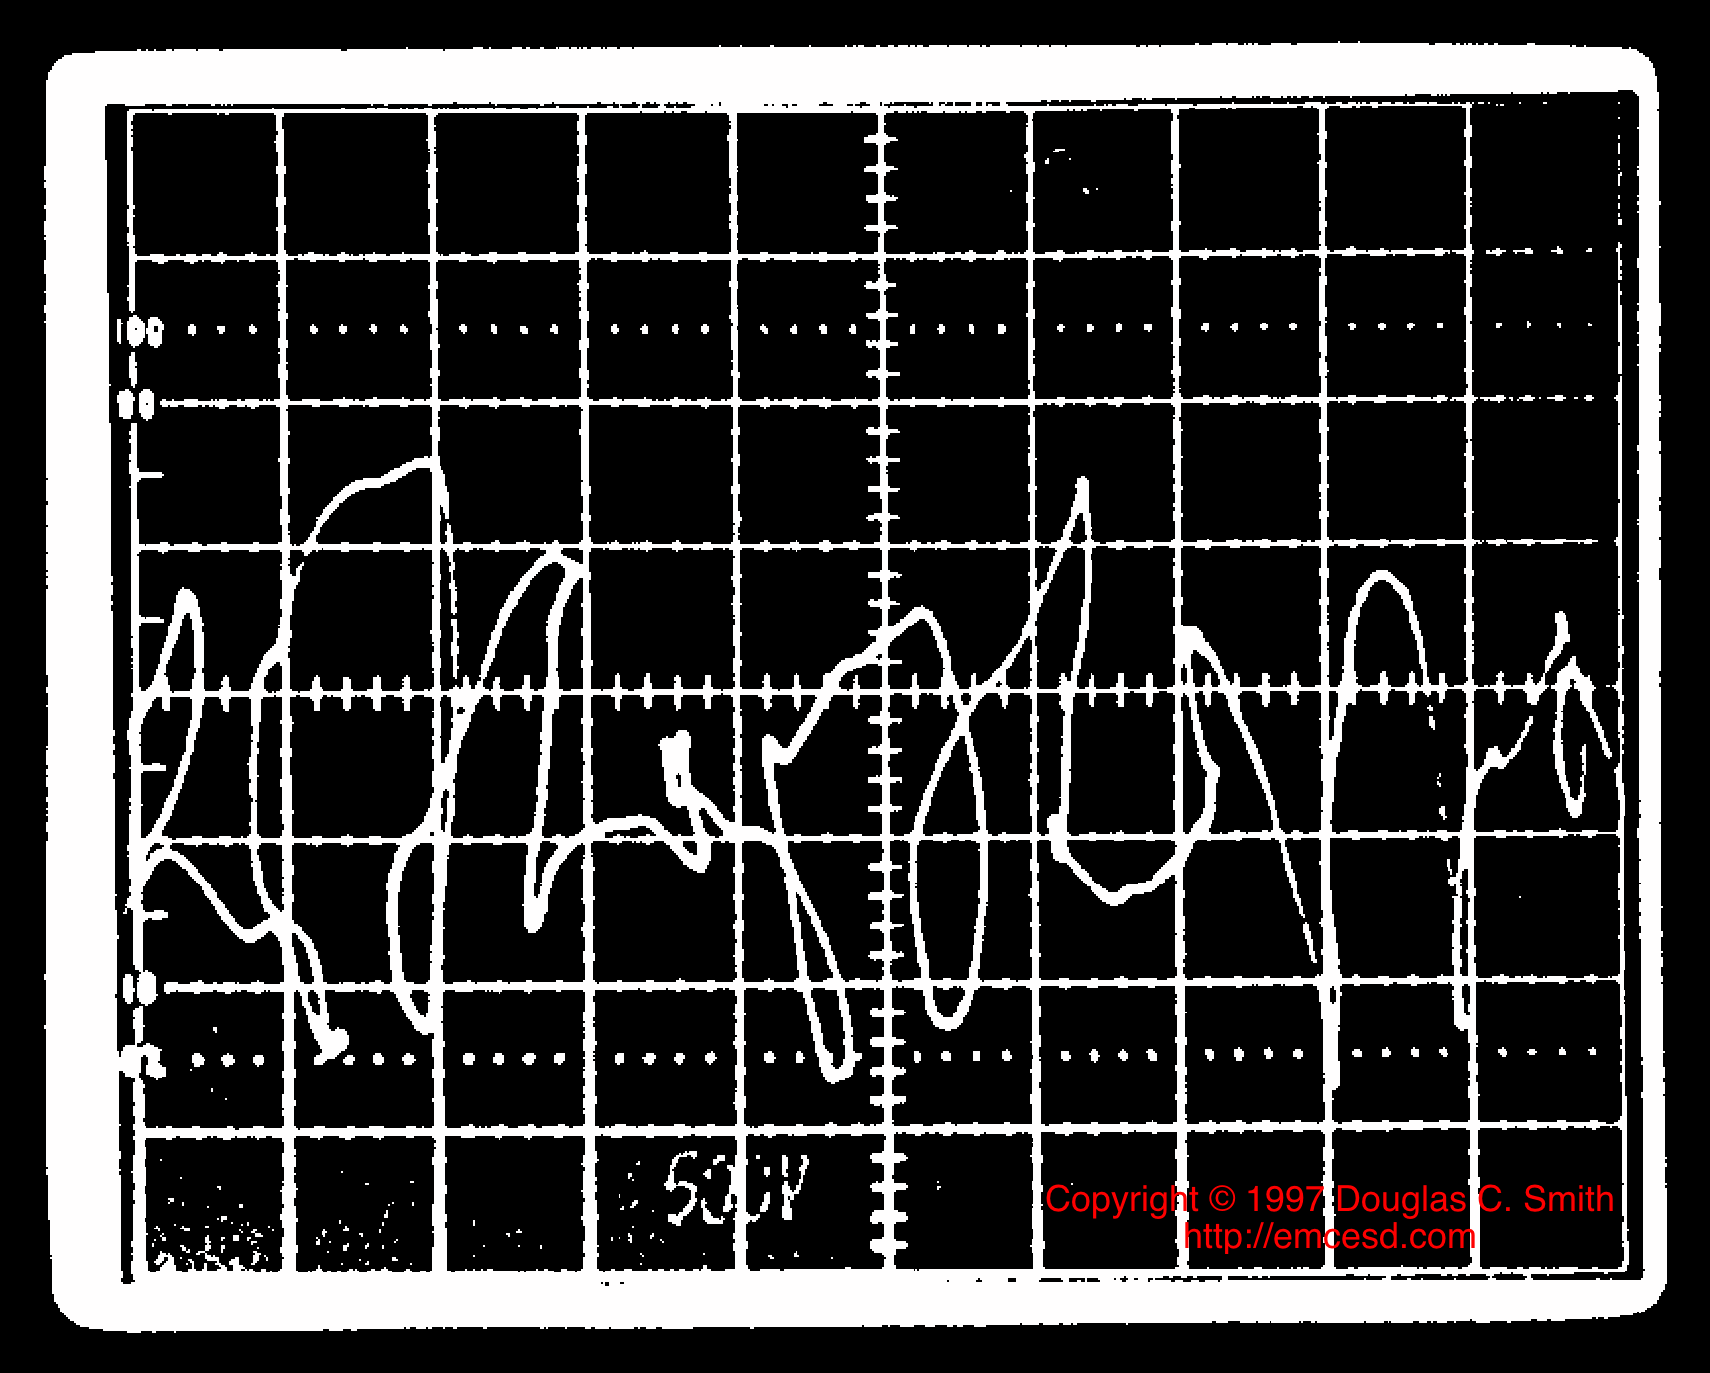 ESD induced error in an analog scope